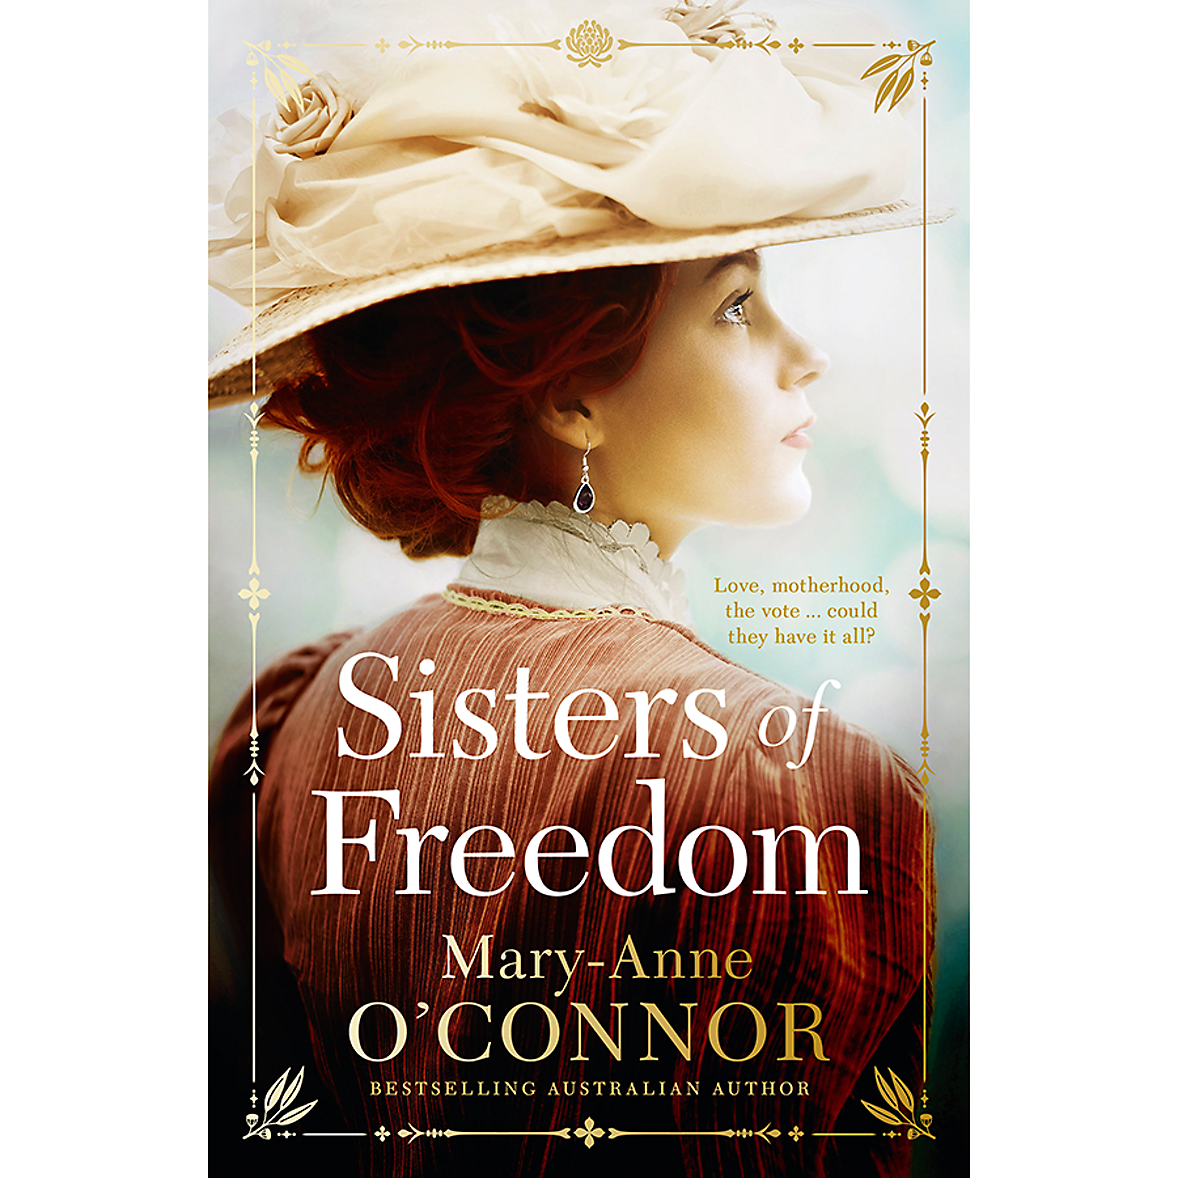 Sisters of Freedom by Mary-Anne O'Connor